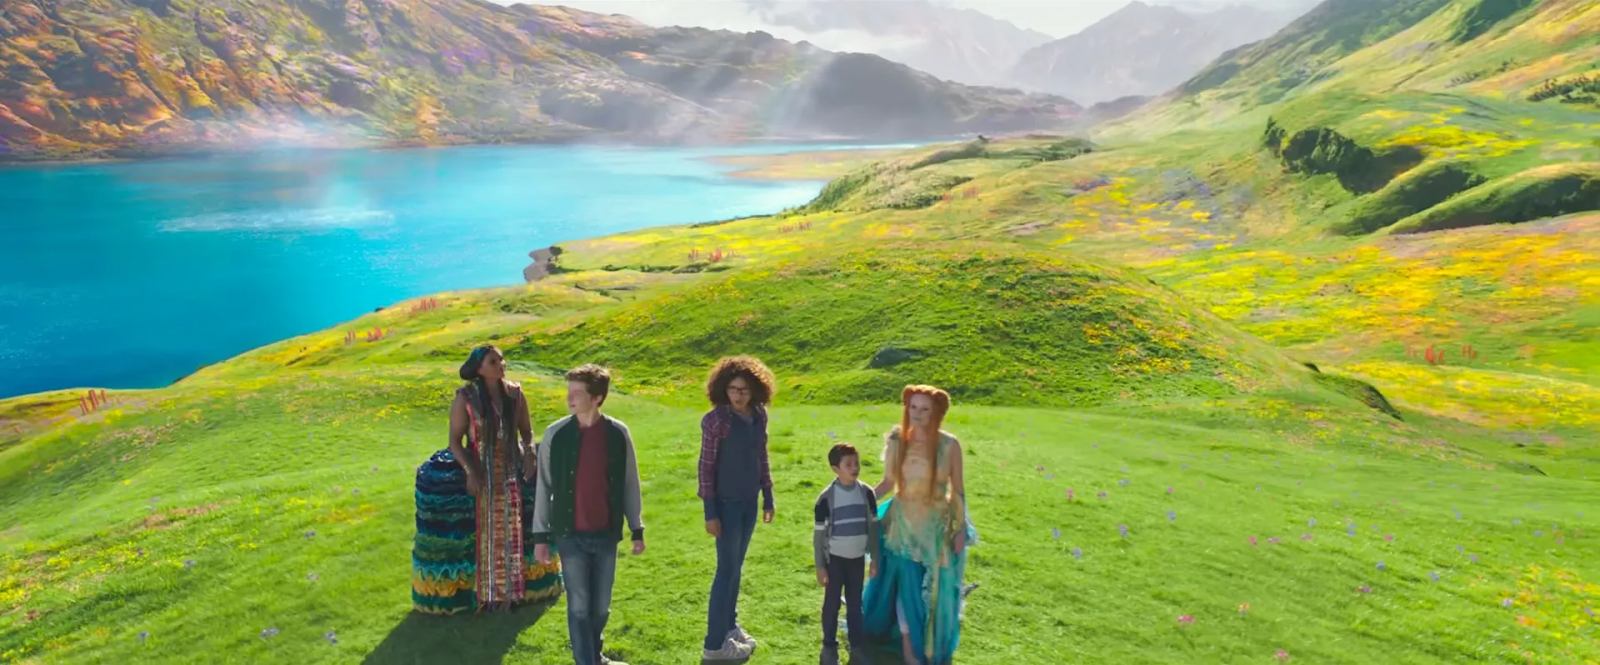 A still from the film A Wrinkle In Time (2018)